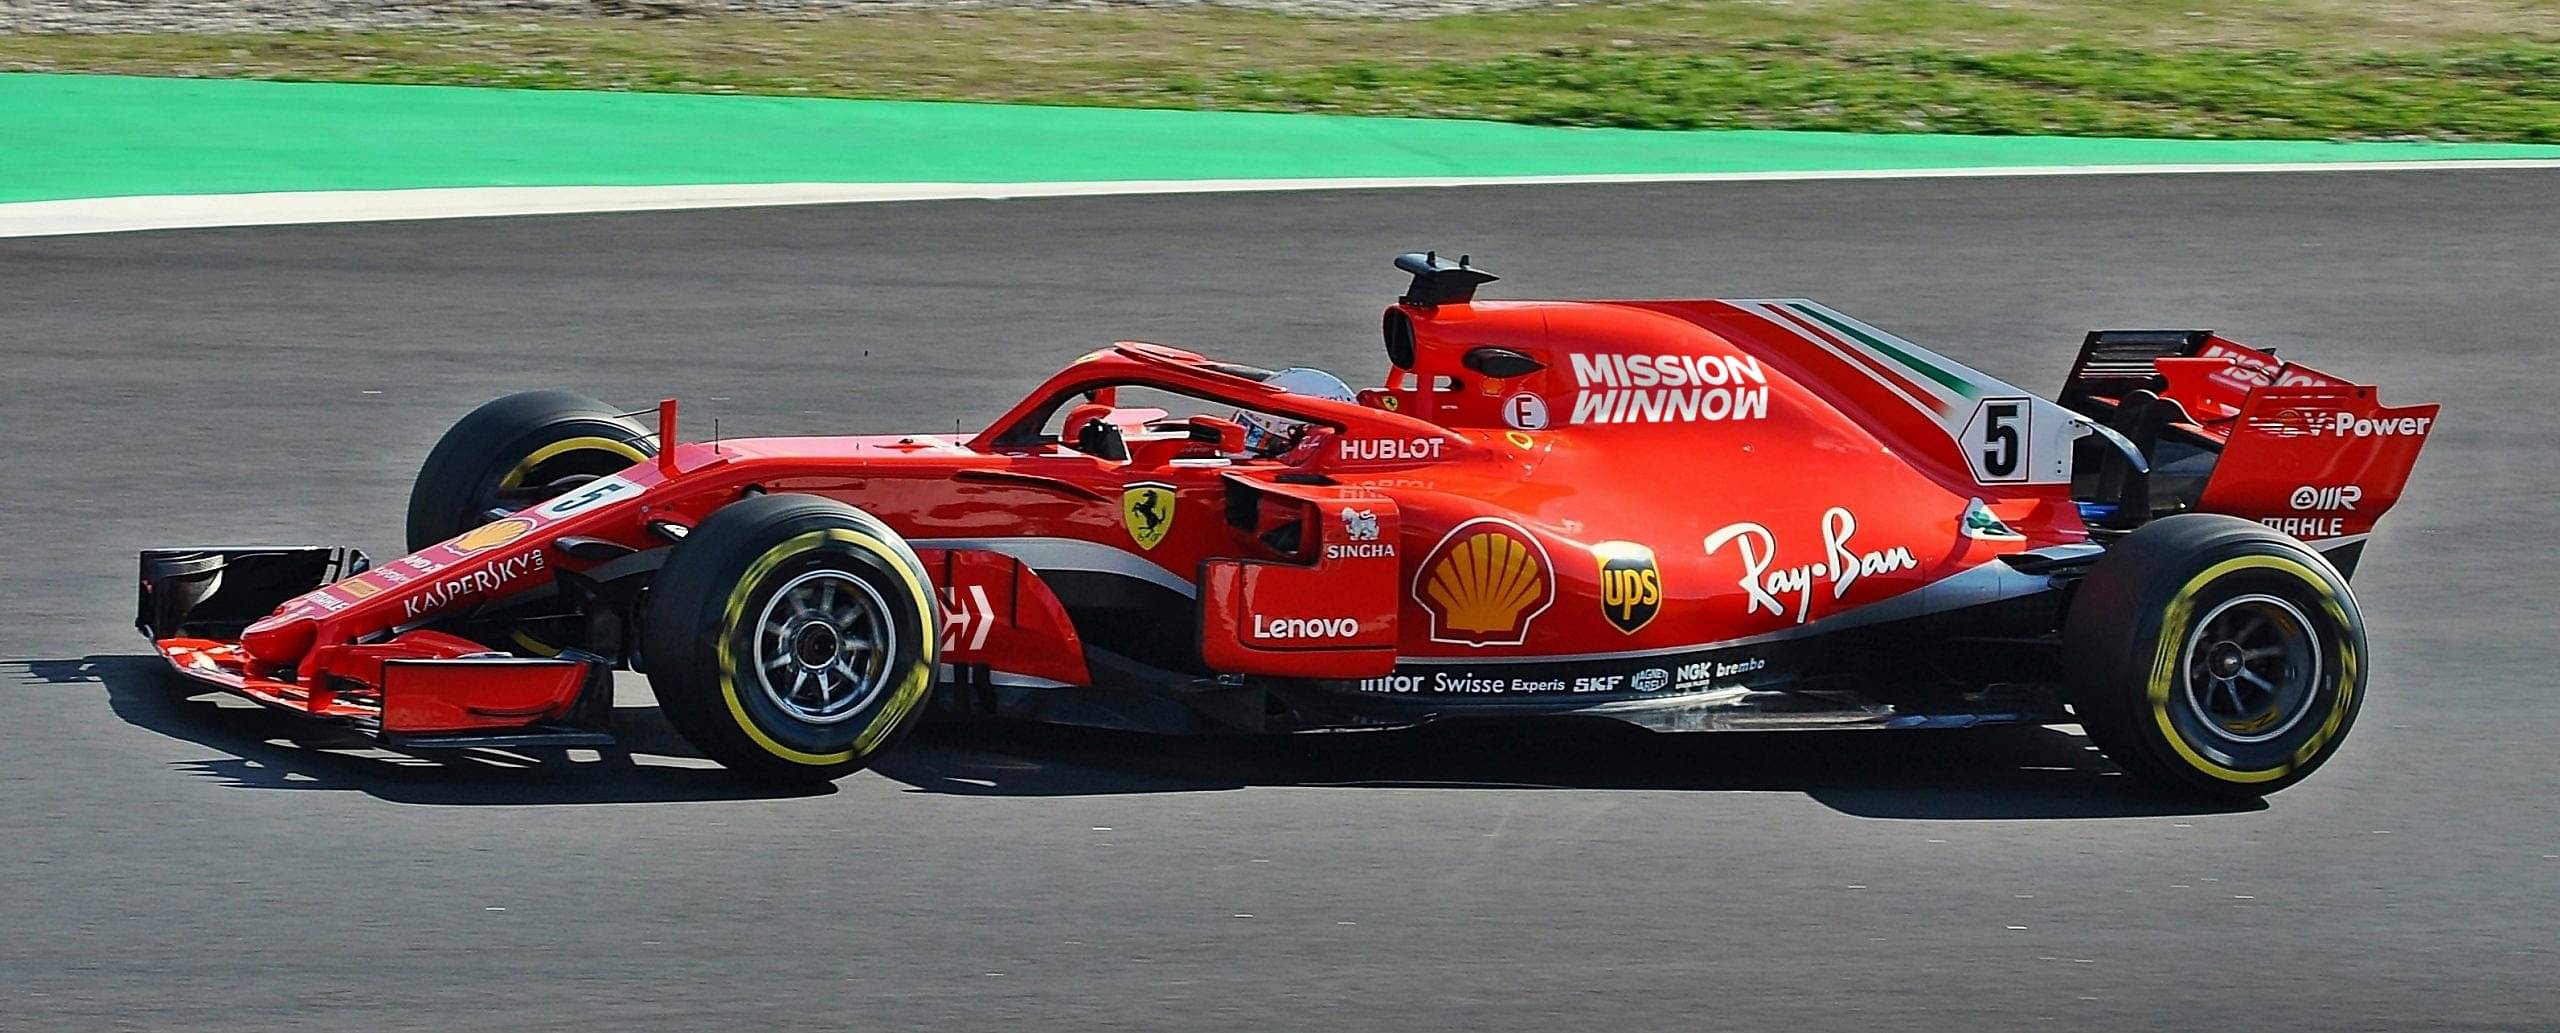 "We want to let the world know how we have changed" - Mission Winnow branding could return to Ferrari F1 this season